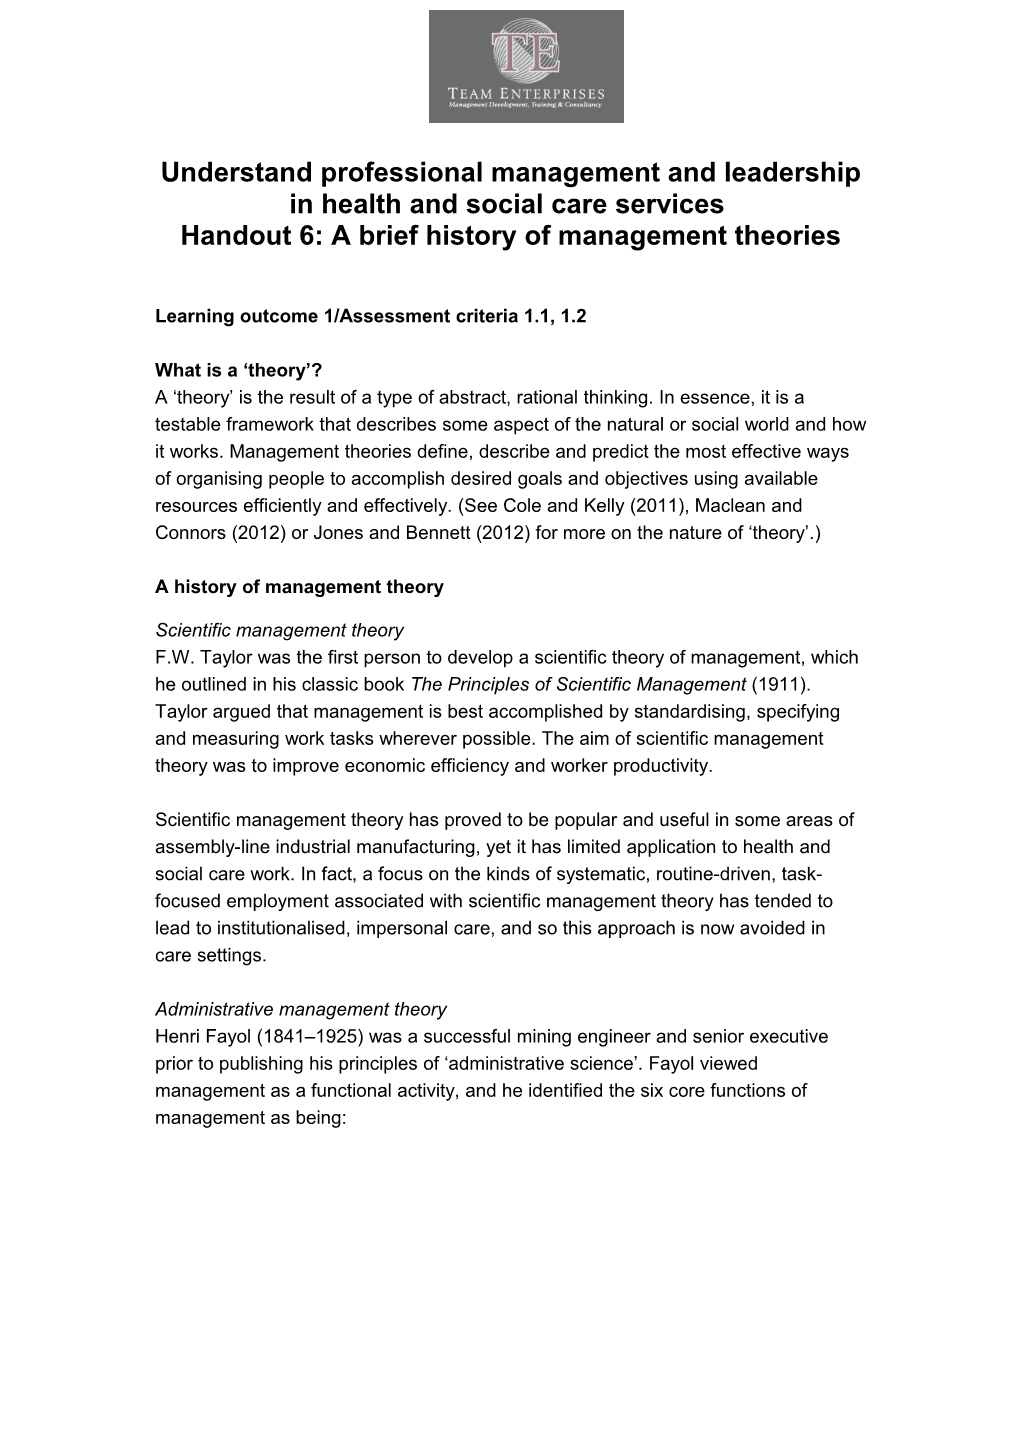 Handout 6: a Brief History of Management Theories